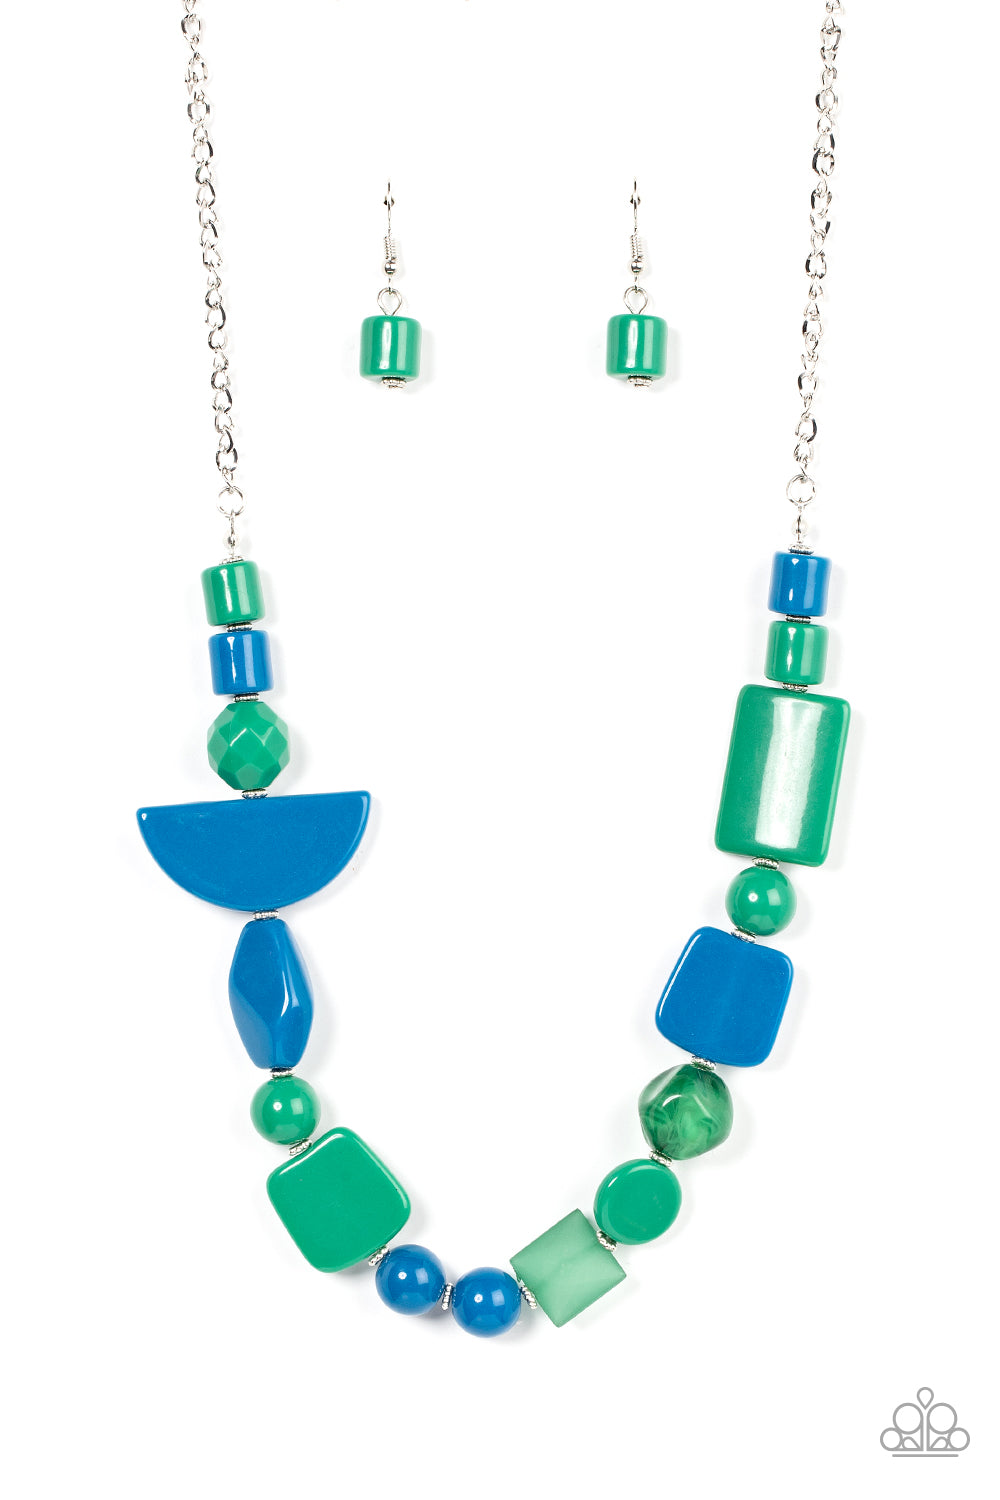 Tranquil Trendsetter Green Necklace - Paparazzi Accessories  Featuring the refreshing hues of Mykonos Blue and Leprechaun, mismatched acrylic and faux rock beads are haphazardly threaded along an invisible wire below the collar for an abstract artisan vibe. Features an adjustable clasp closure.  Sold as one individual necklace. Includes one pair of matching earrings.